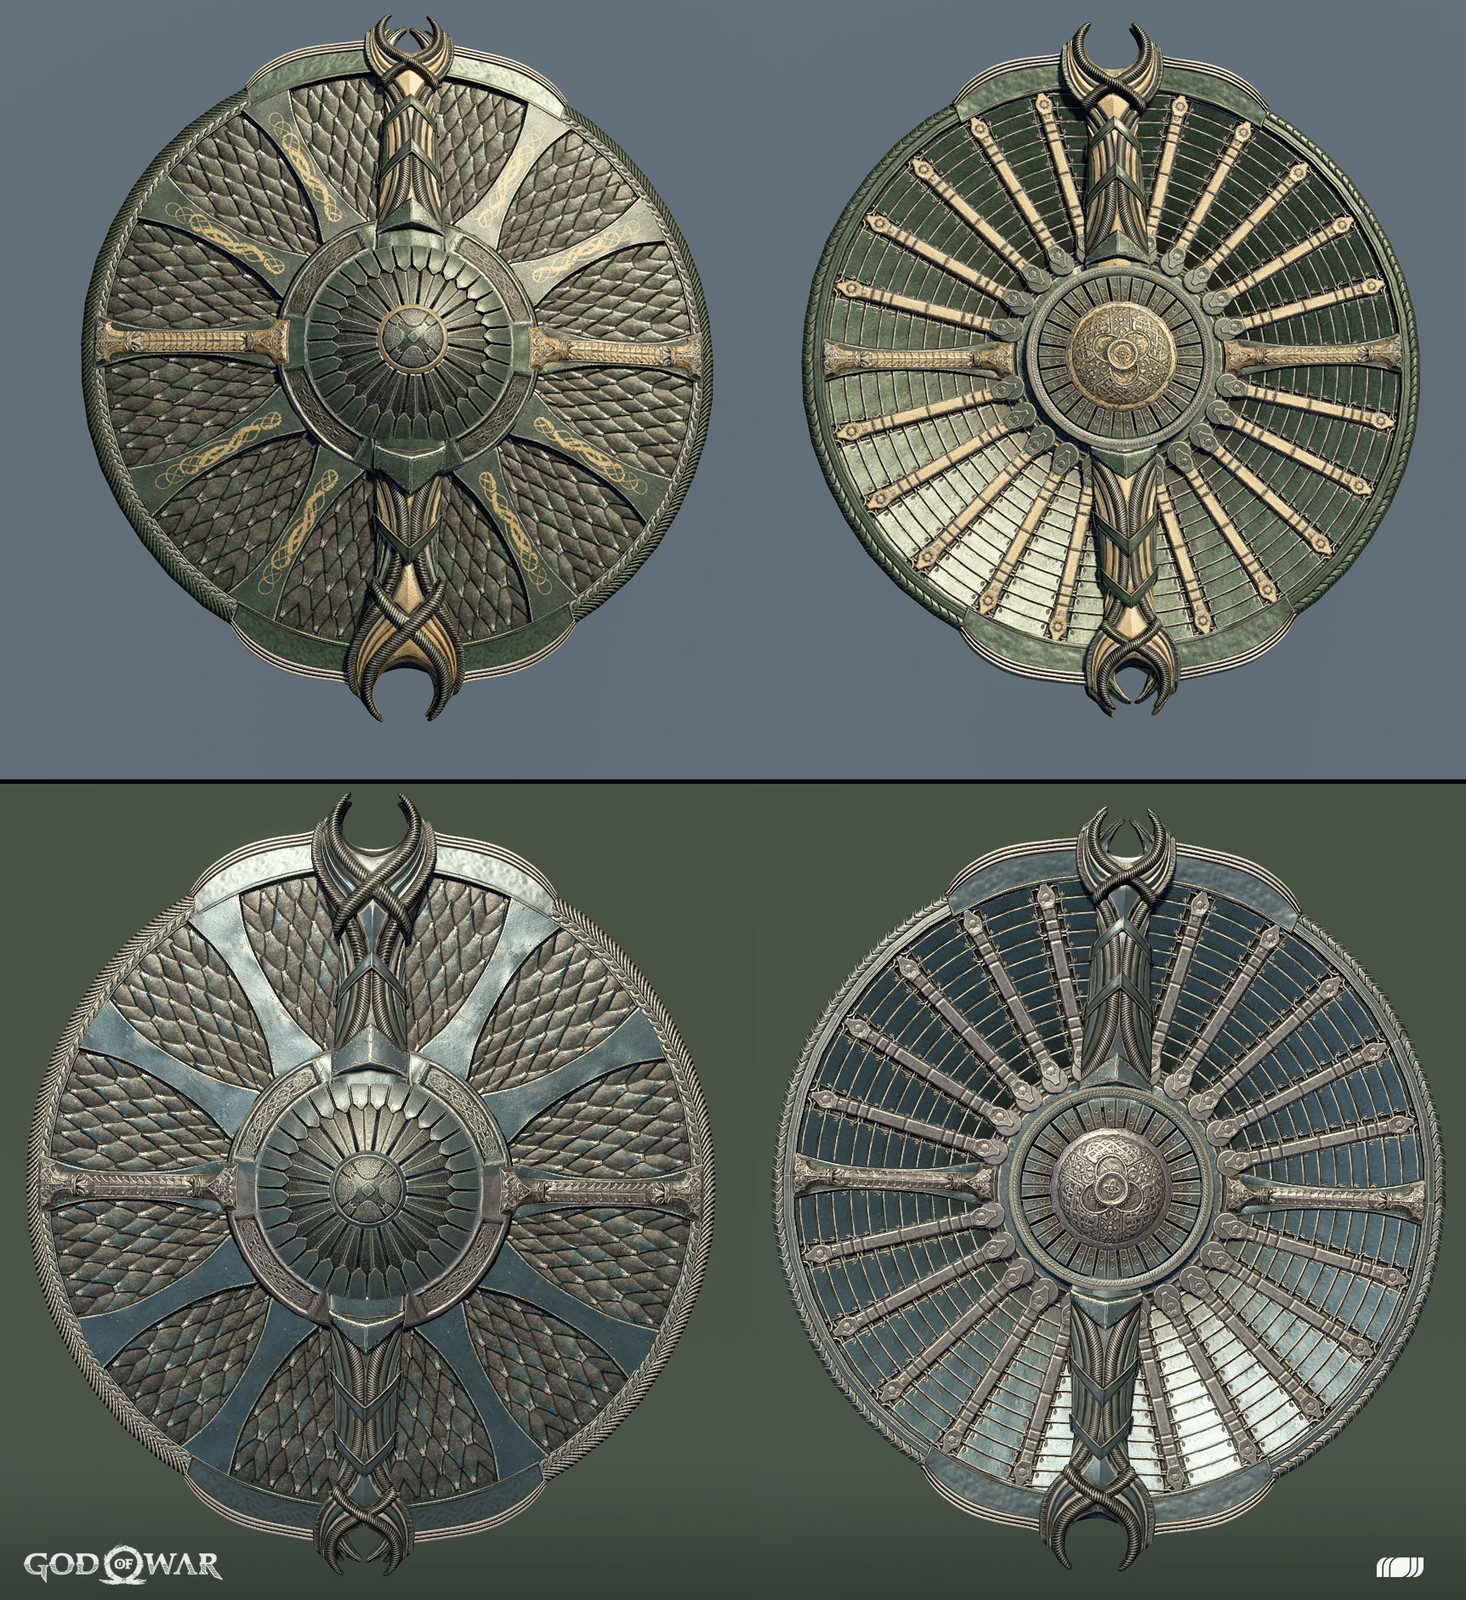 Shield Variations texture work
Concept by Vance Kovacs